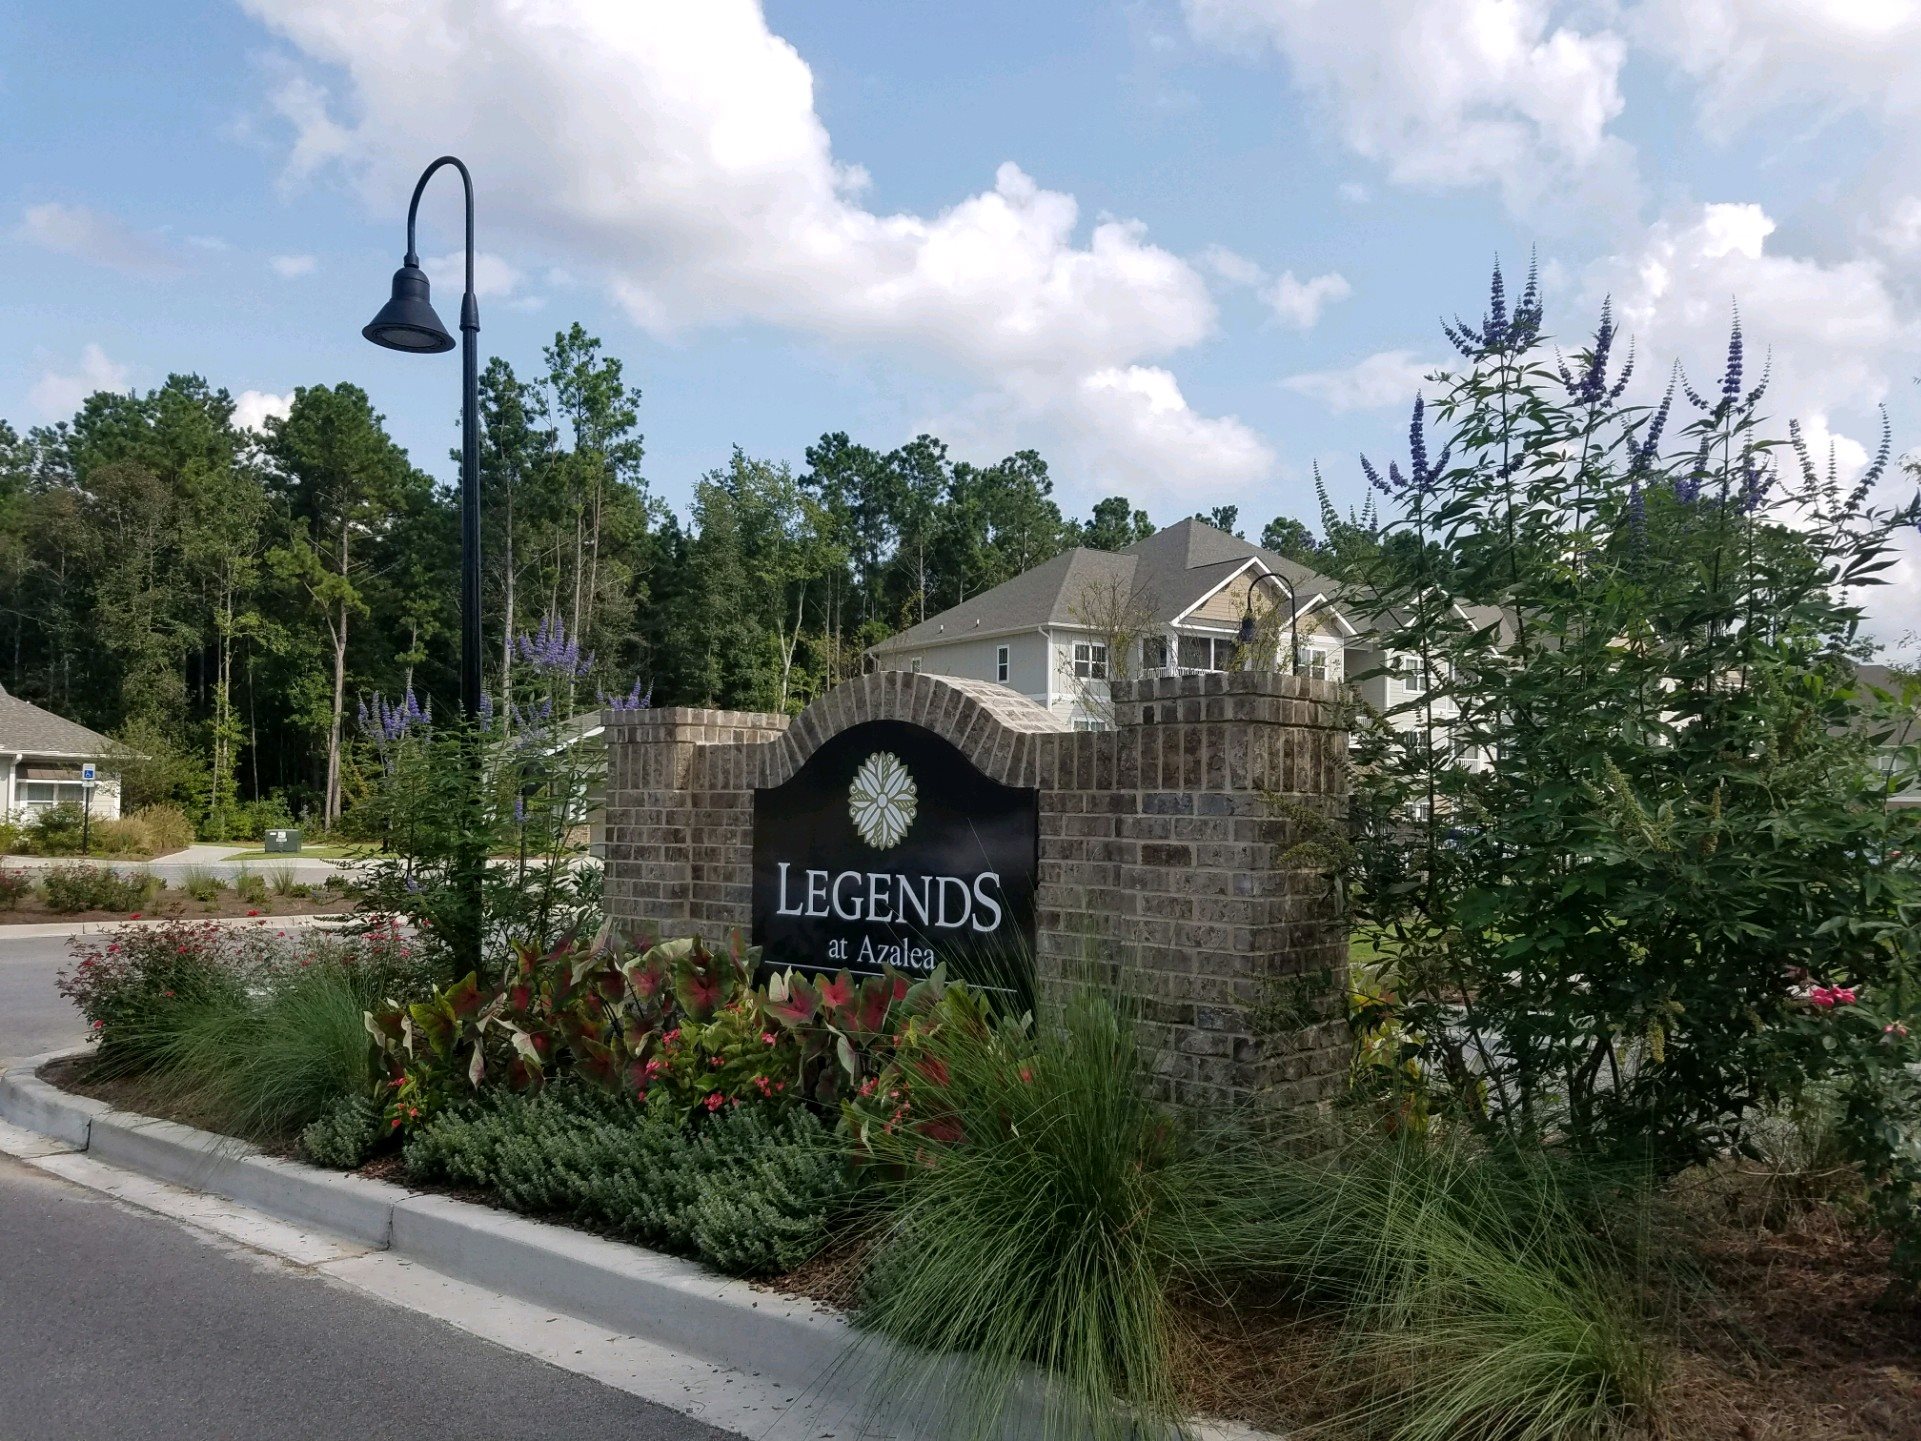 Photos and Video of Legends at Azalea in Summerville, SC